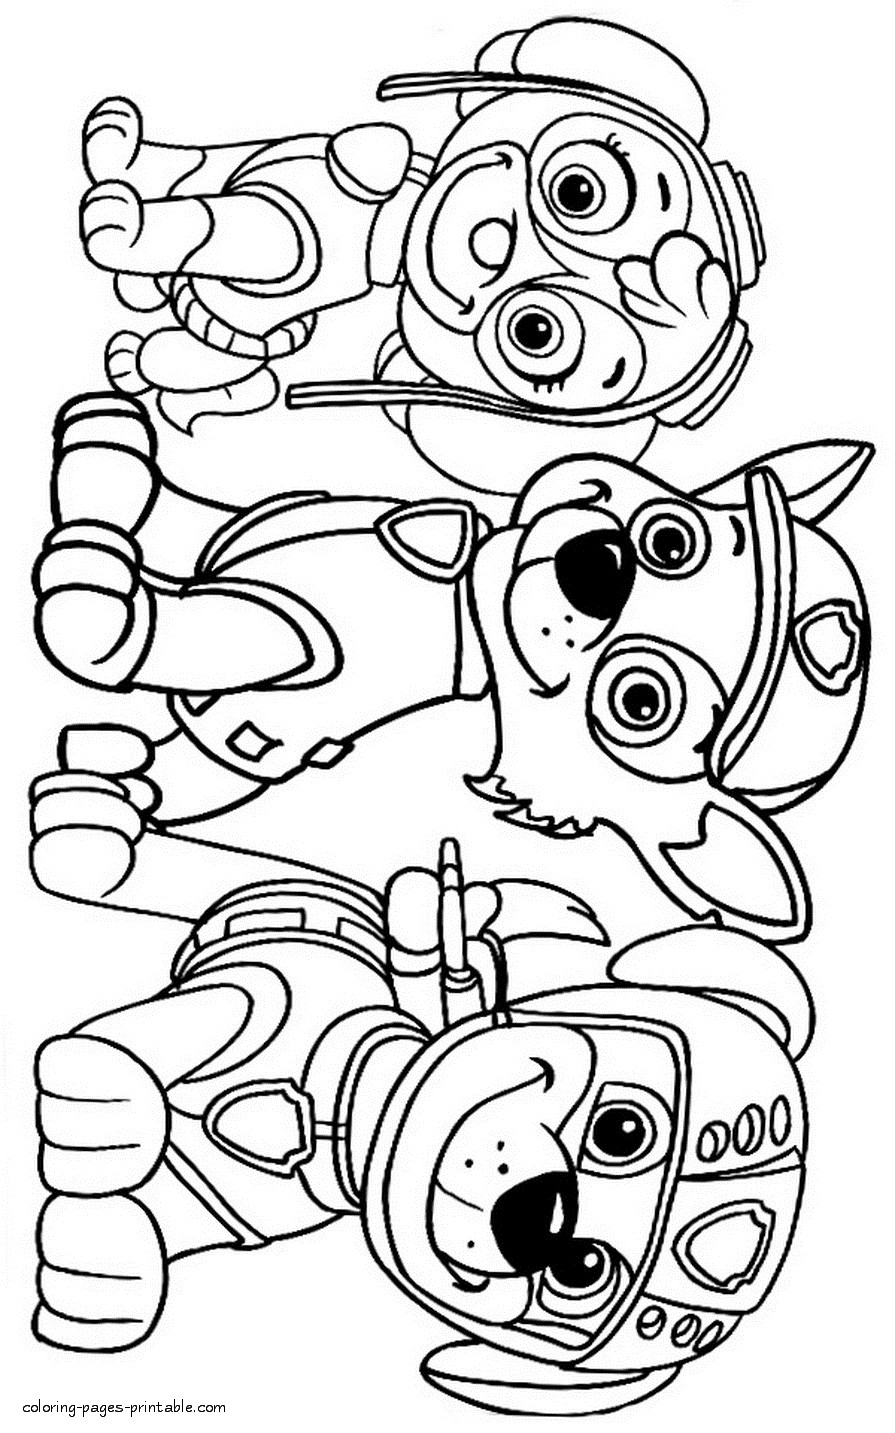 Paw Patrol Coloring Pages Of Halloween For Preschoolers Coloring Pages